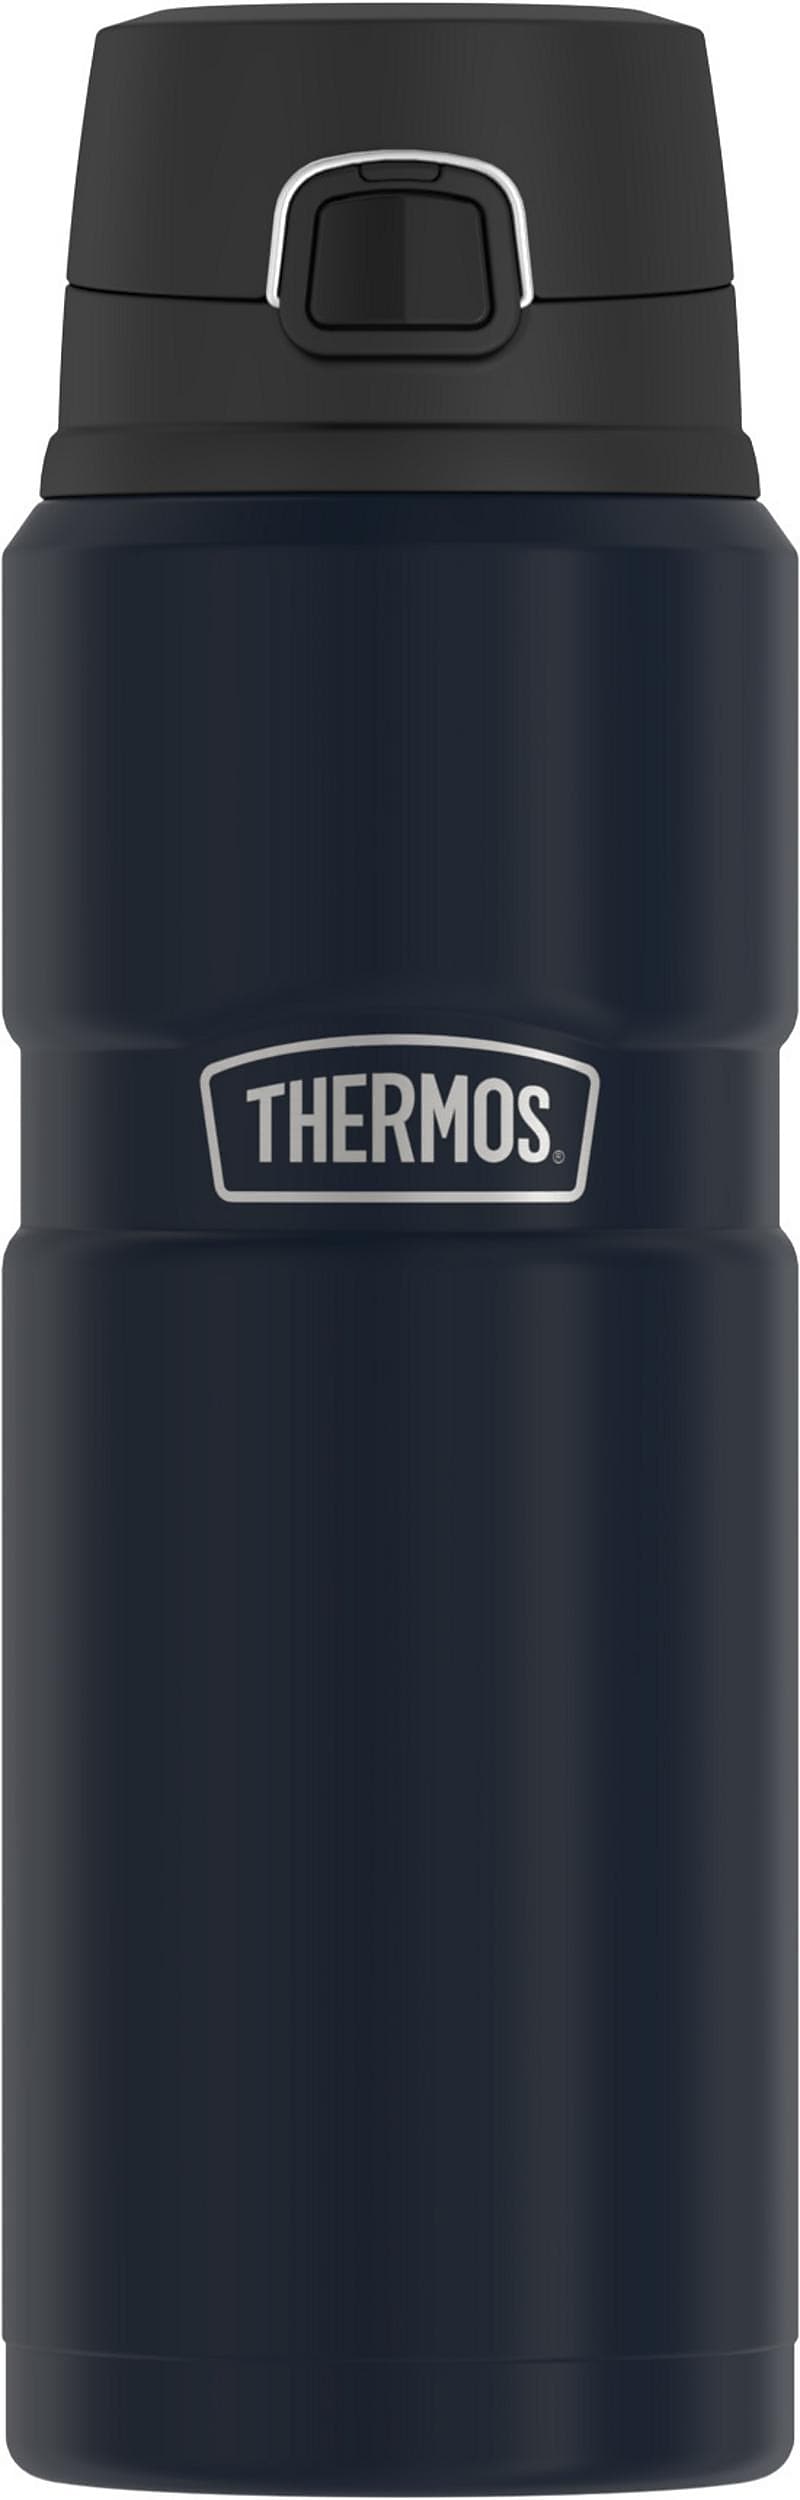 Thermos King Stainless Steel Vacuum Insulated Travel Mug, 24 oz., Midnight Blue